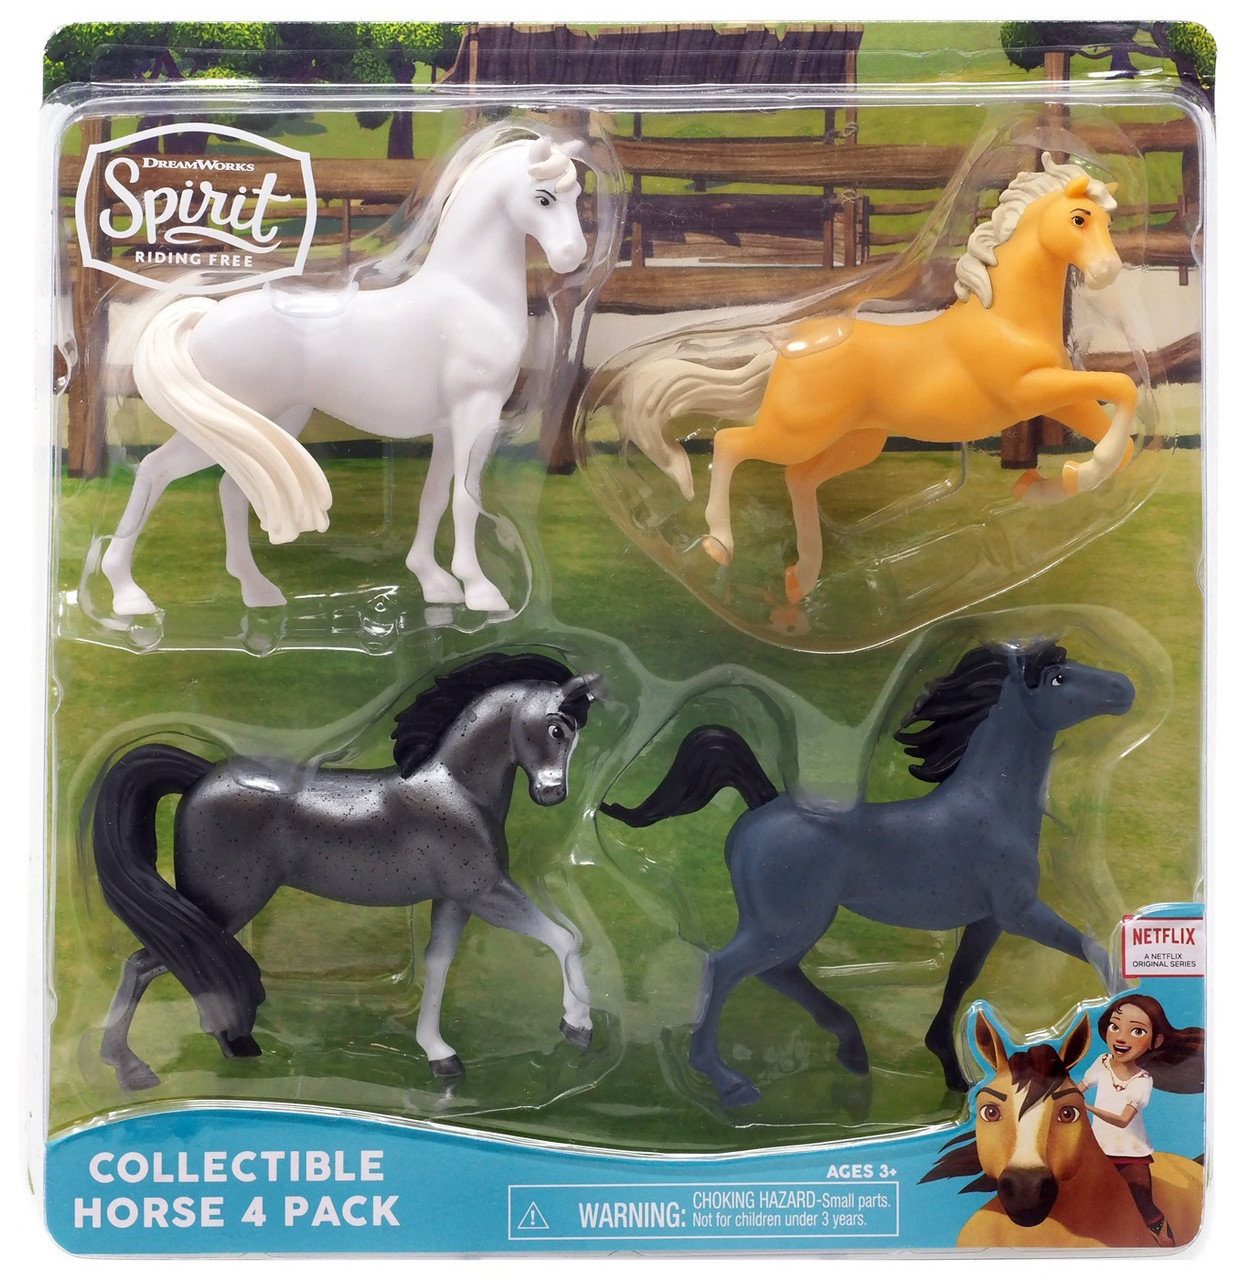 Spirit Riding Free Collectible Horse Figure 4 Pack Version 2 Just Play Toywiz - roblox blind mystery box 4pk series 2 action figures case collectible